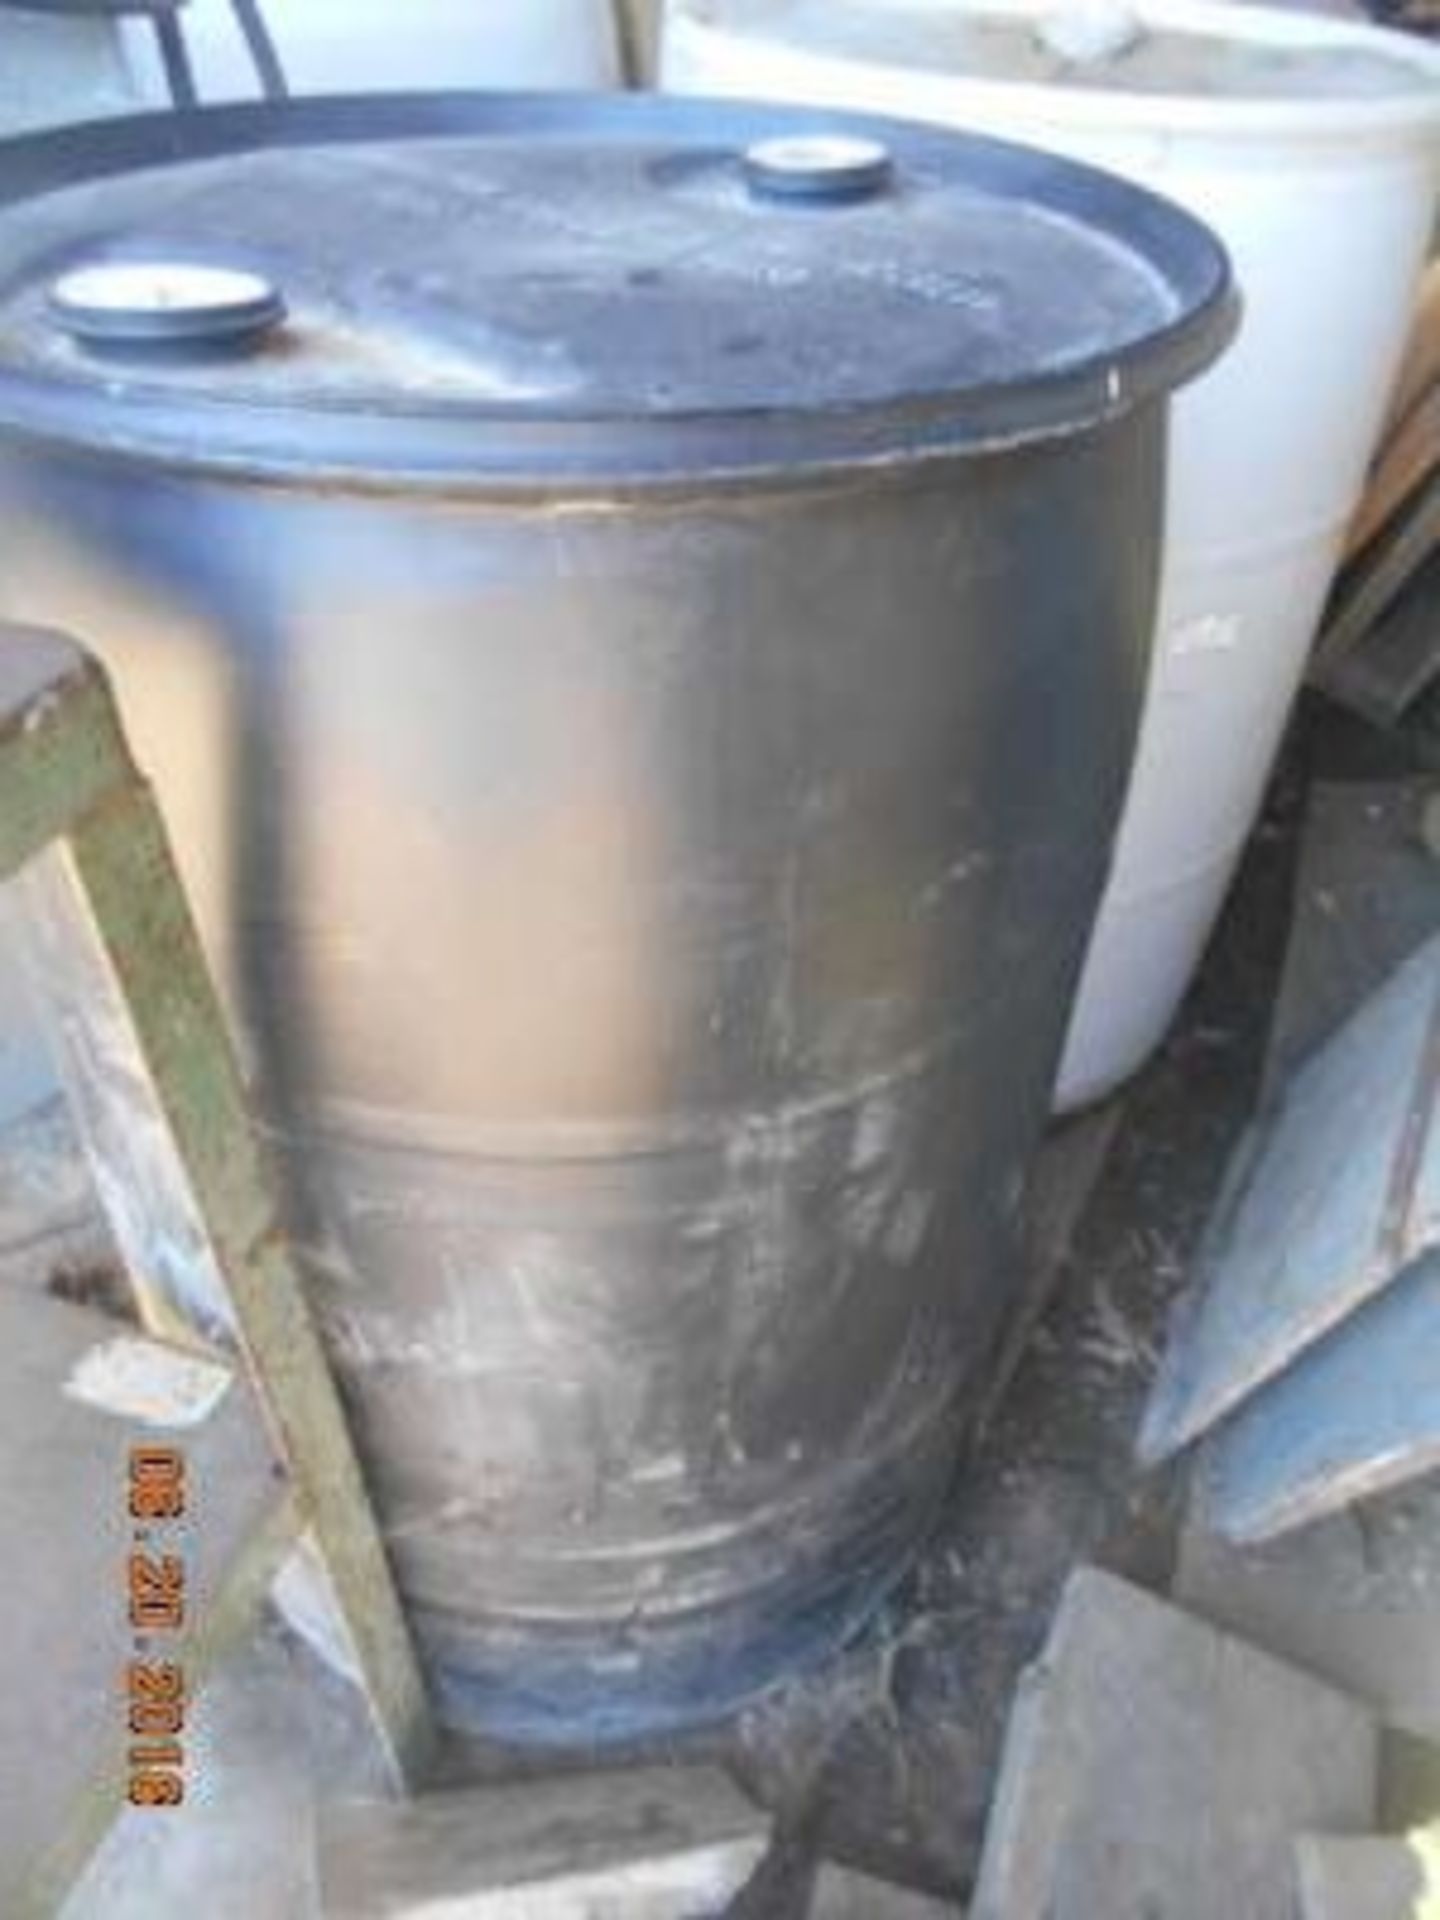 45 gallon drum of 10-30 Full Synthetic Oil - Image 2 of 2